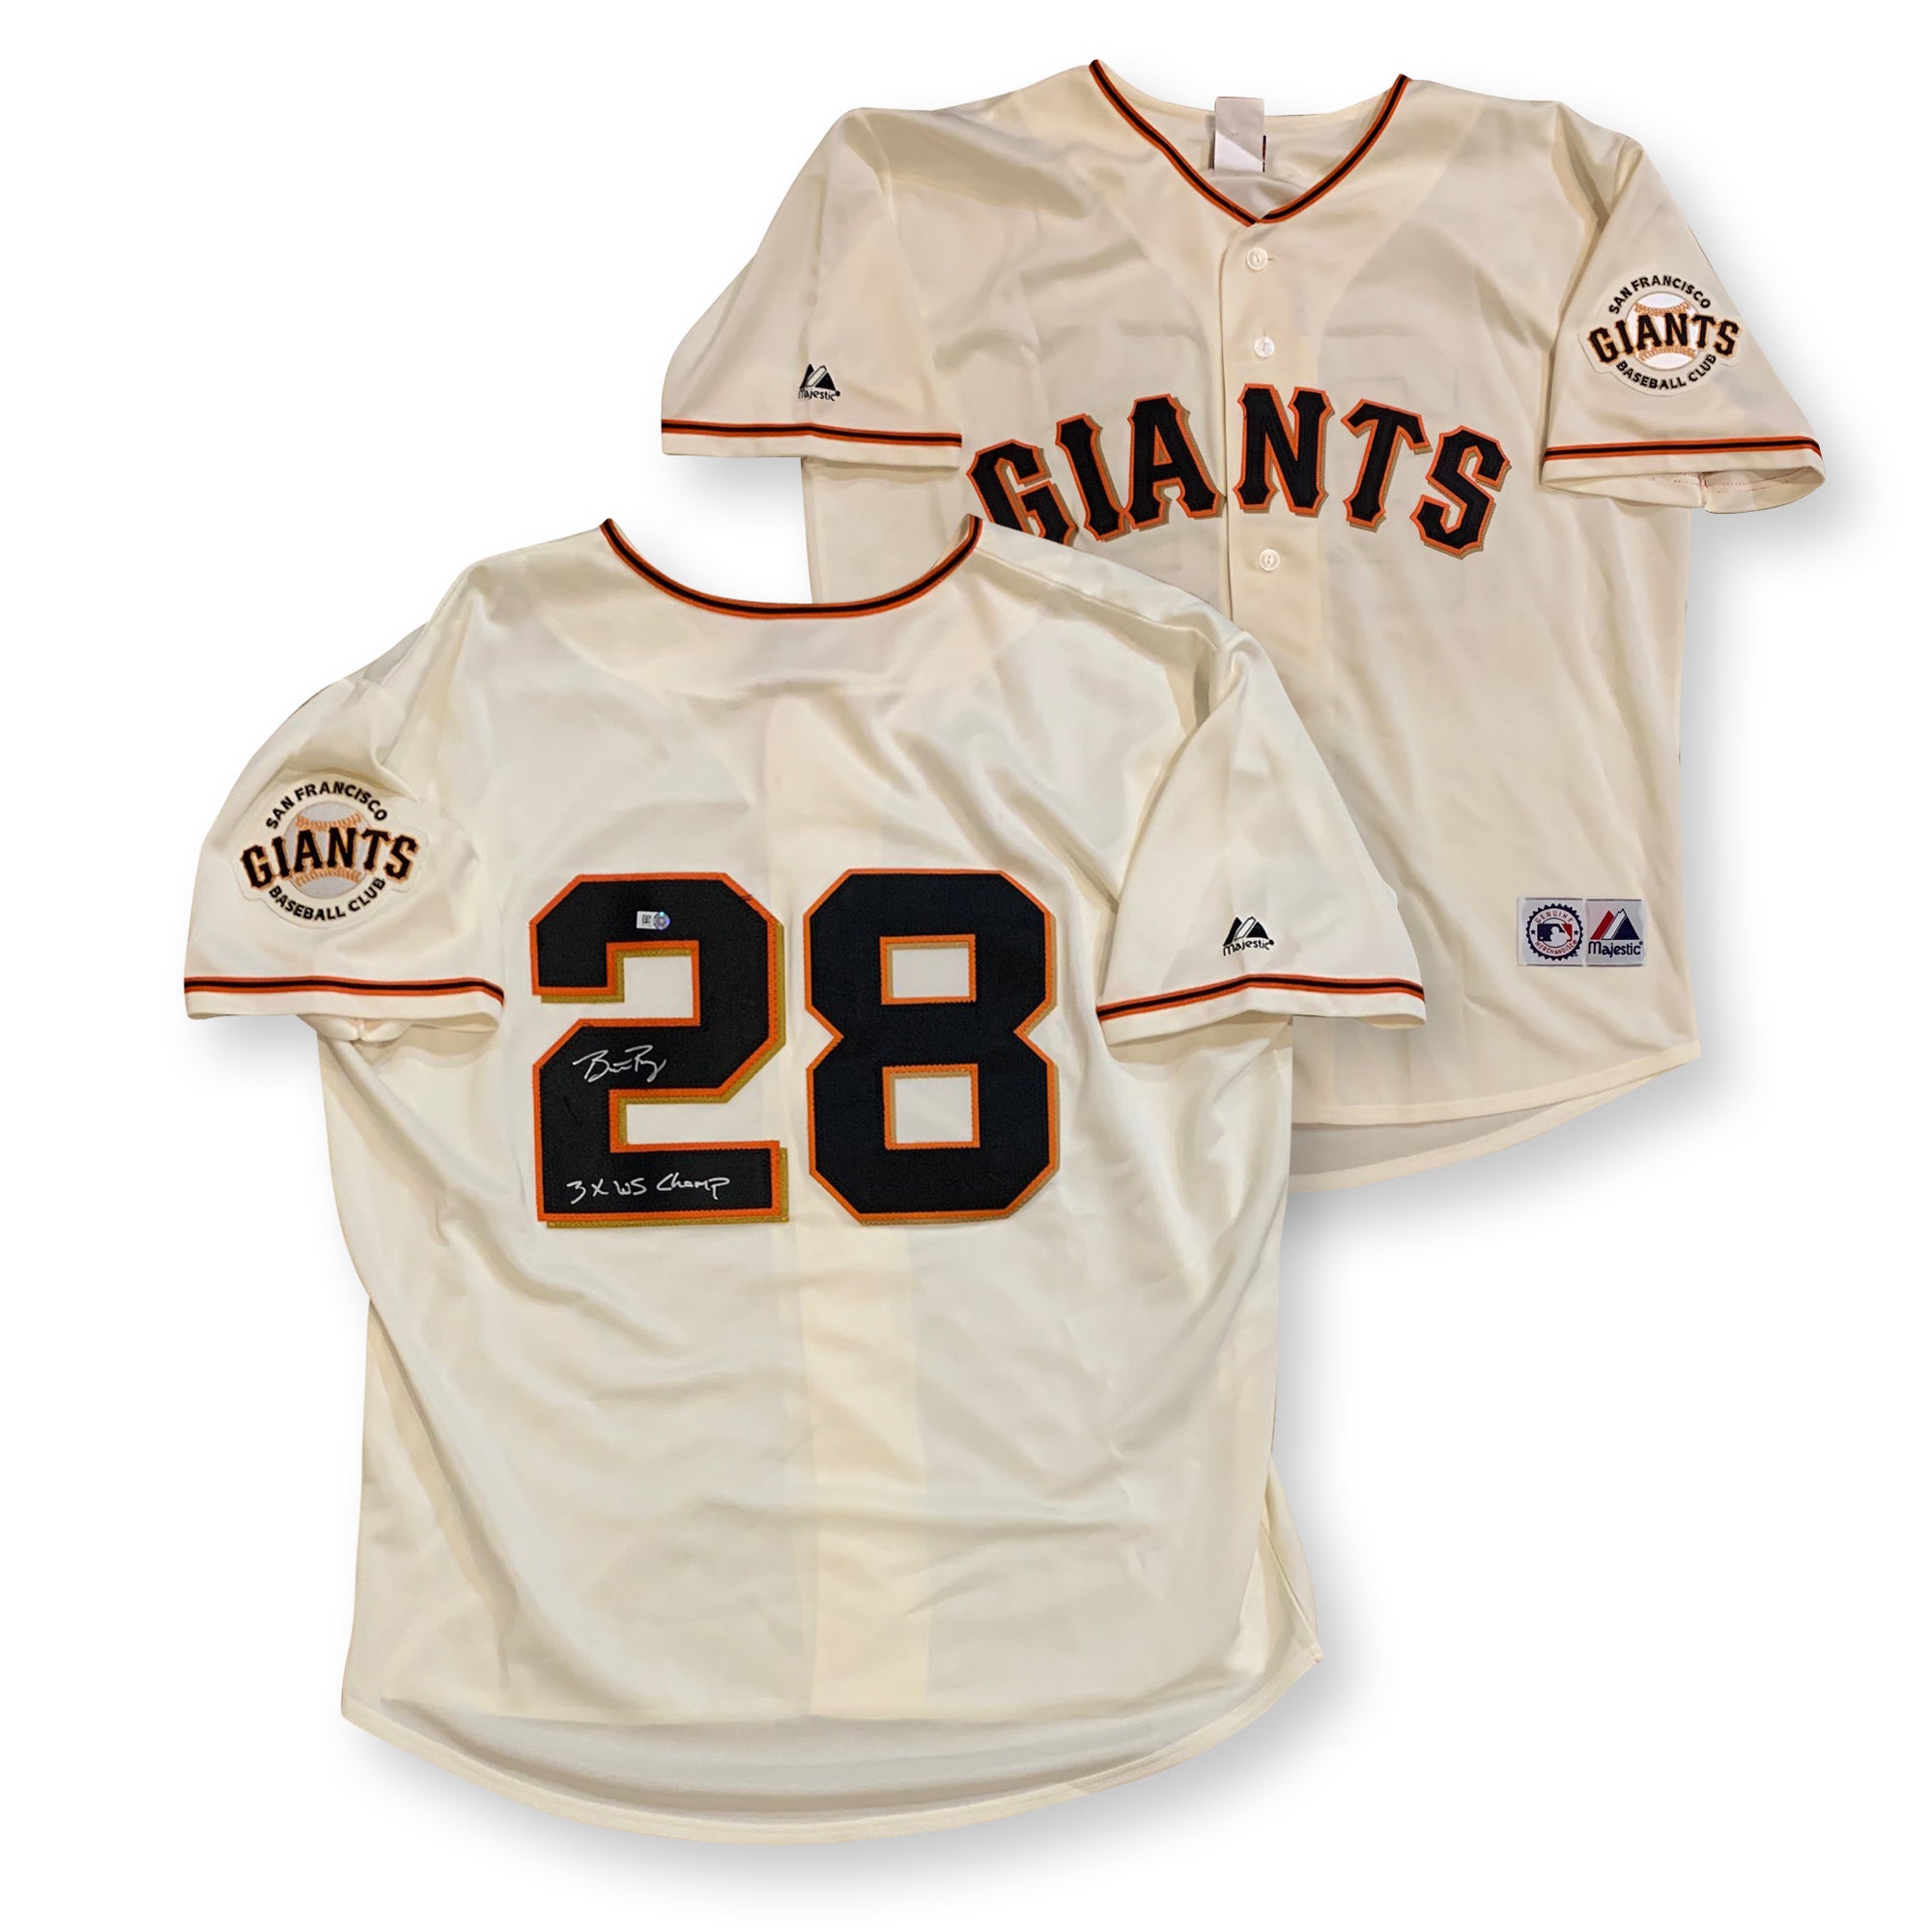 Buster Posey Autographed San Francisco Giants Signed Majestic Cream Jersey 3 x World Series Champion MLB Authenticated COA-Powers Sports Memorabilia